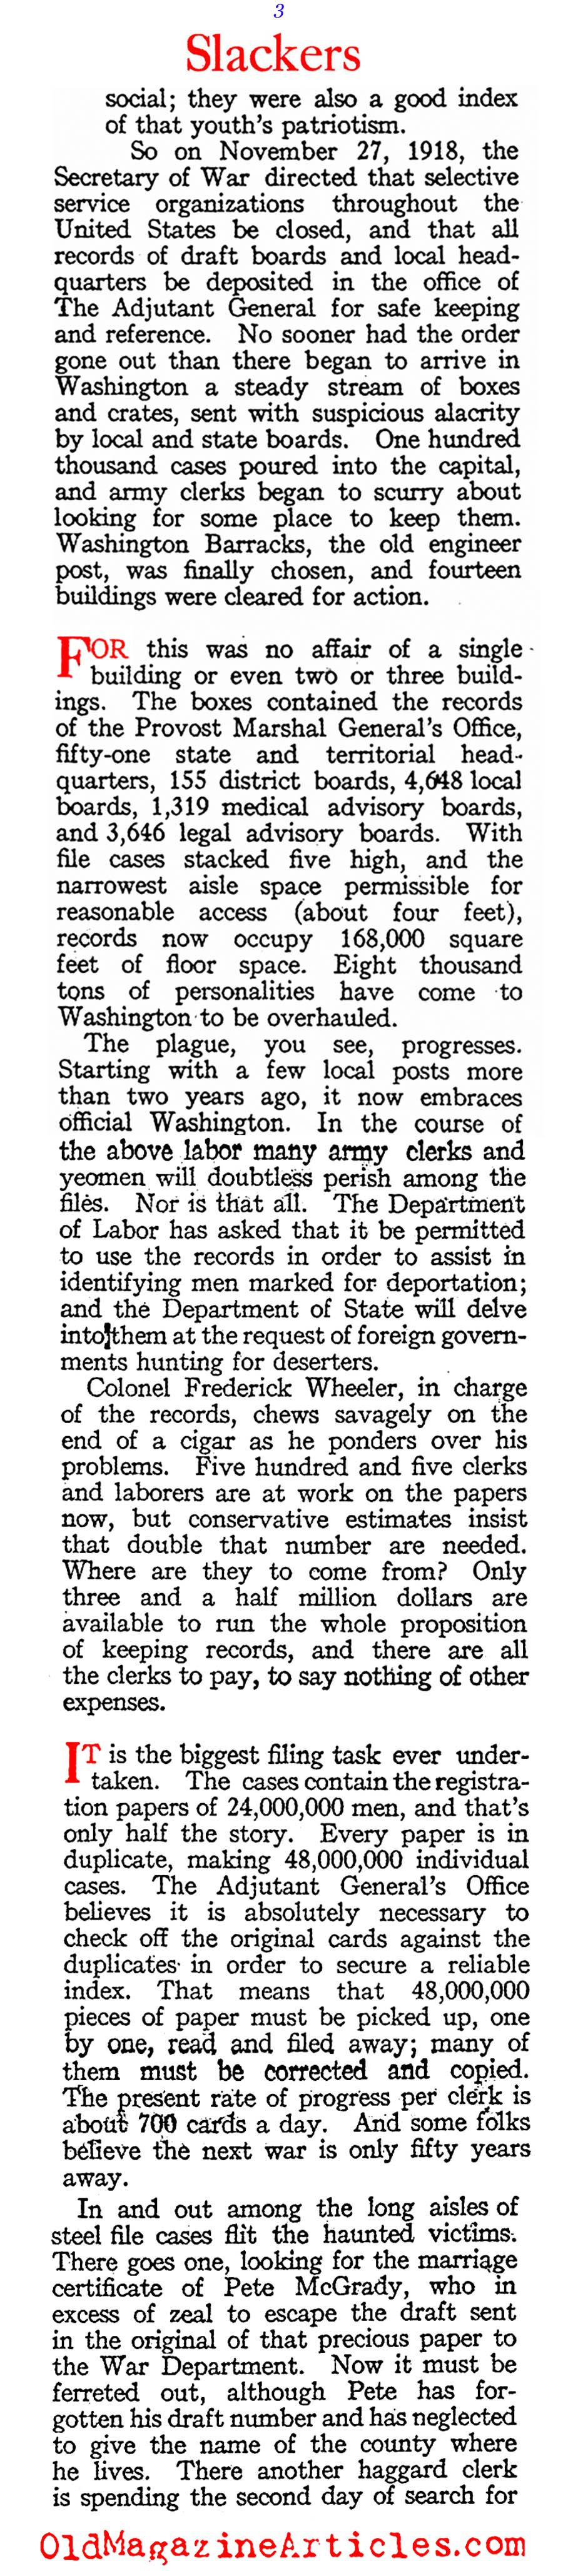 In Search of the W.W. I Draft Dodgers (American Legion Weekly, 1920)